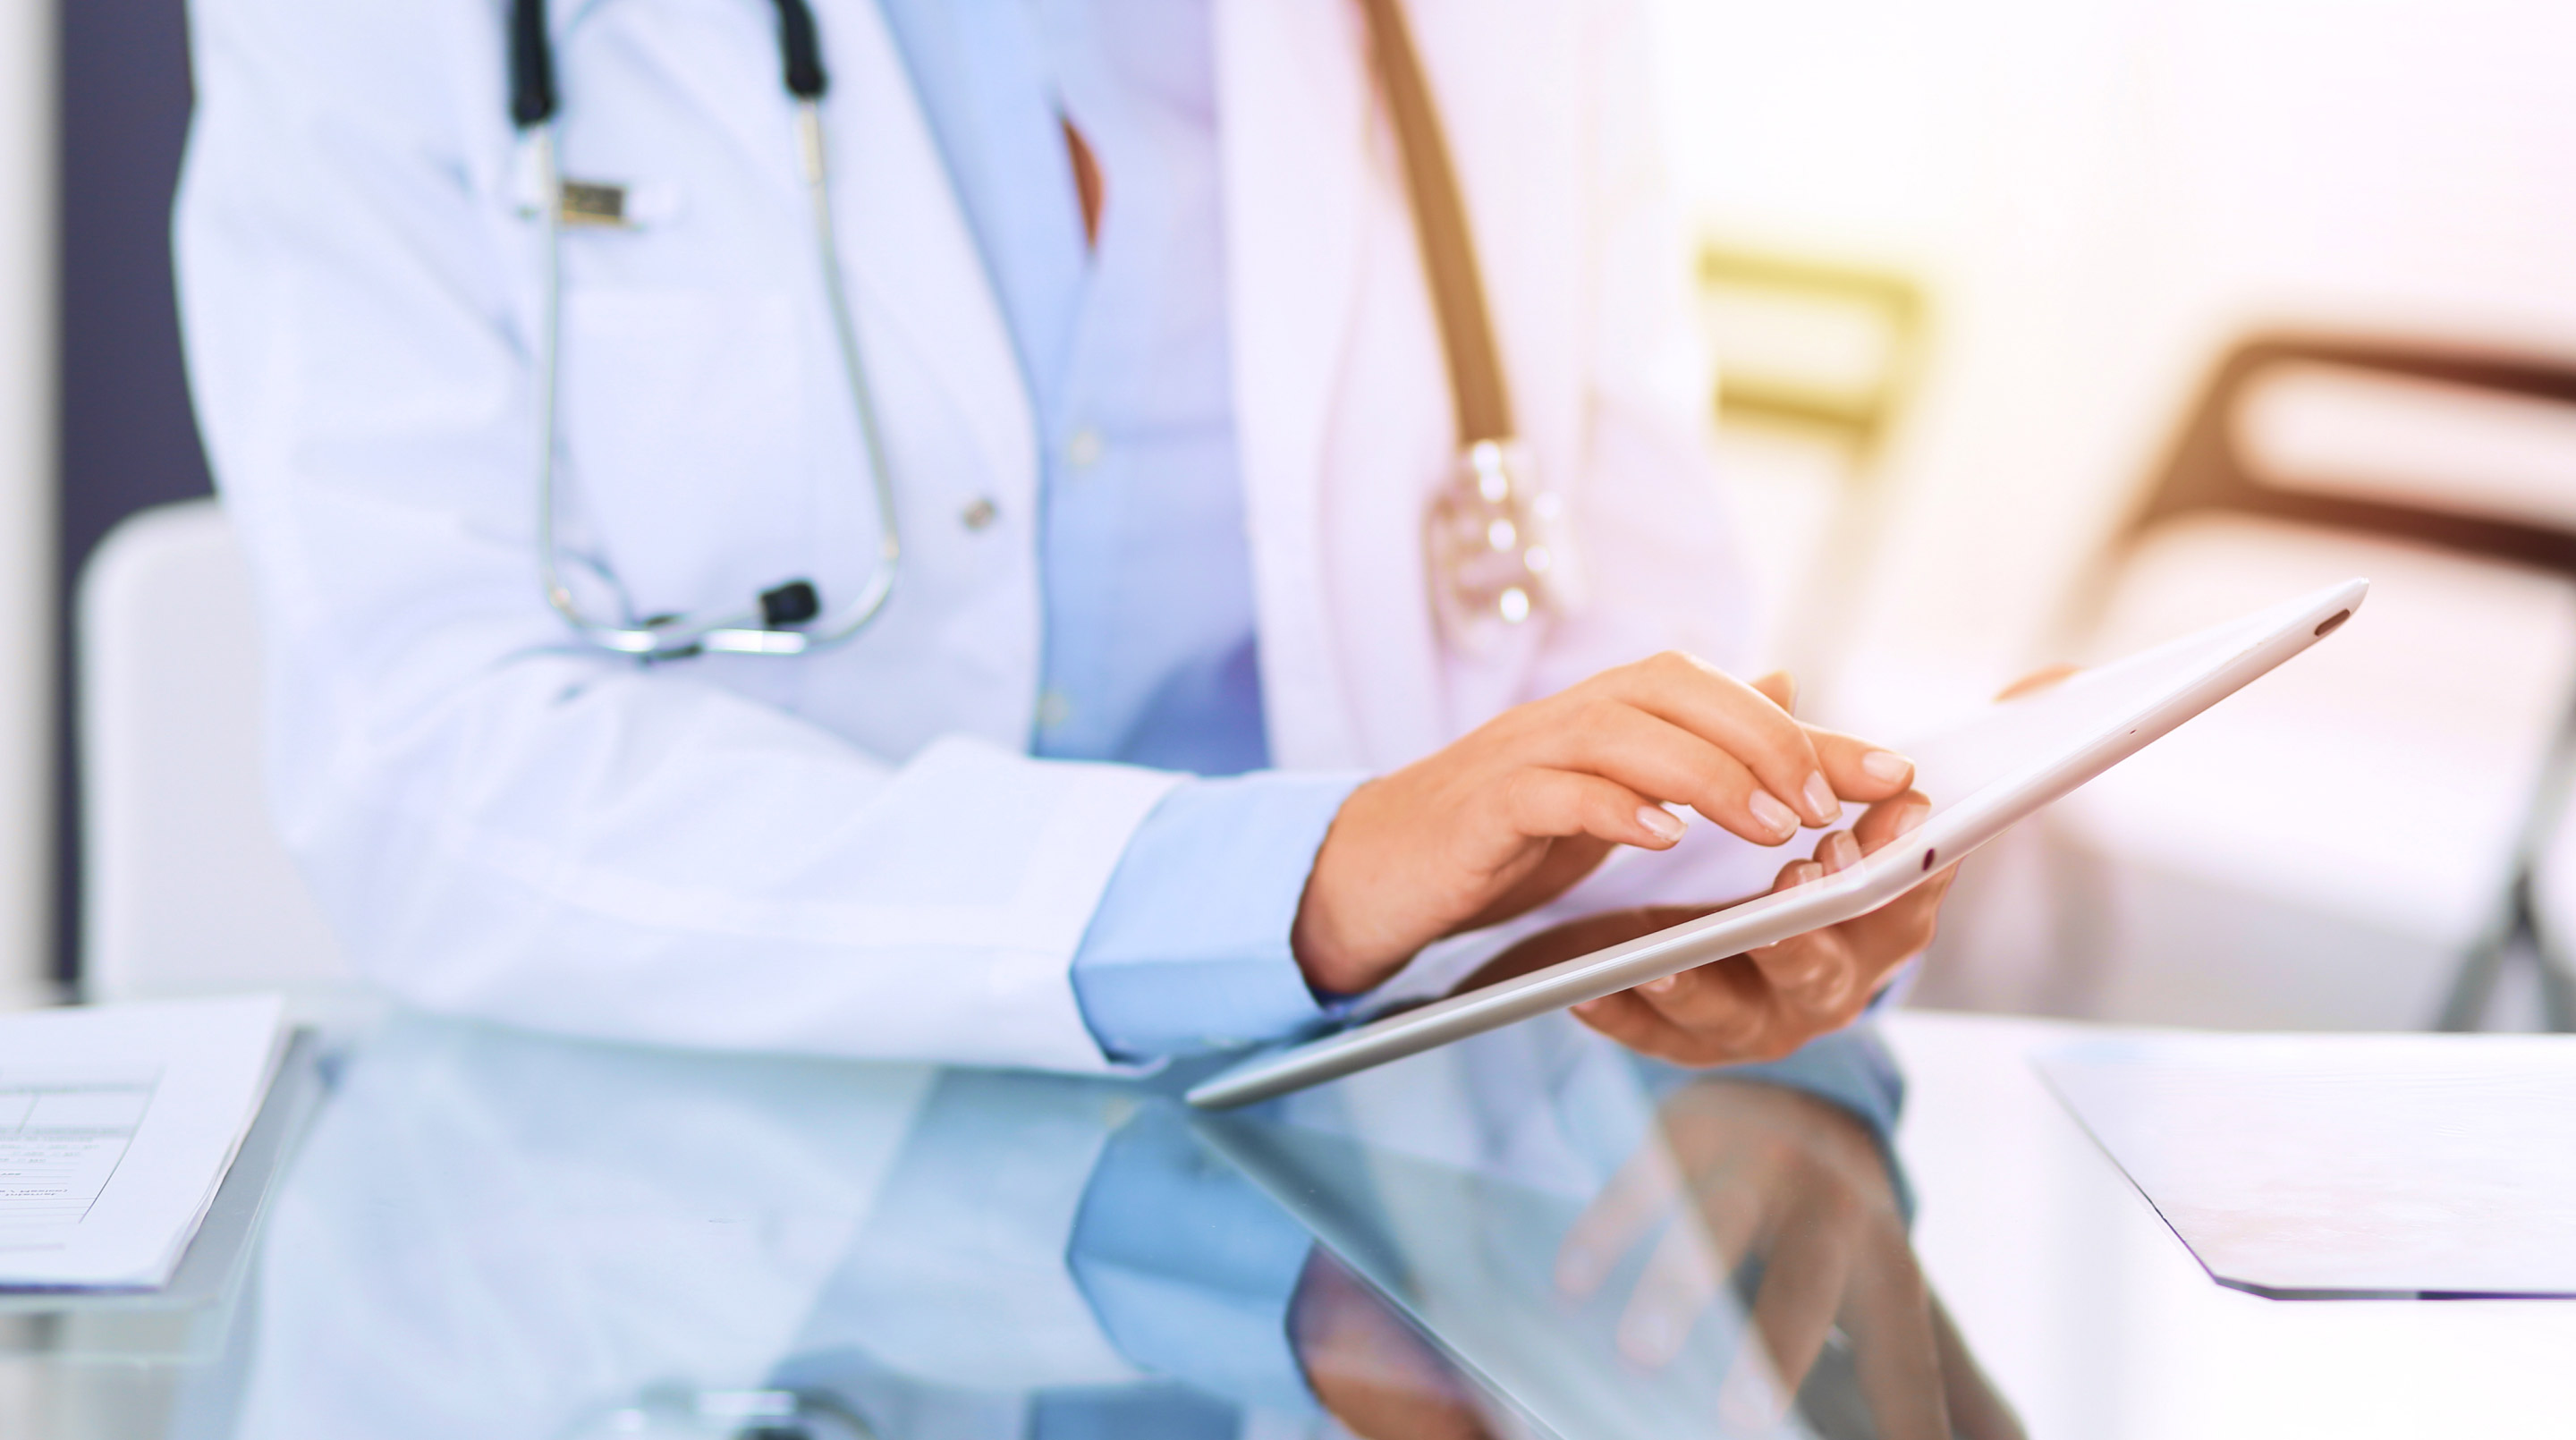 Taking Patient Care a Step Ahead with RWE Analytics